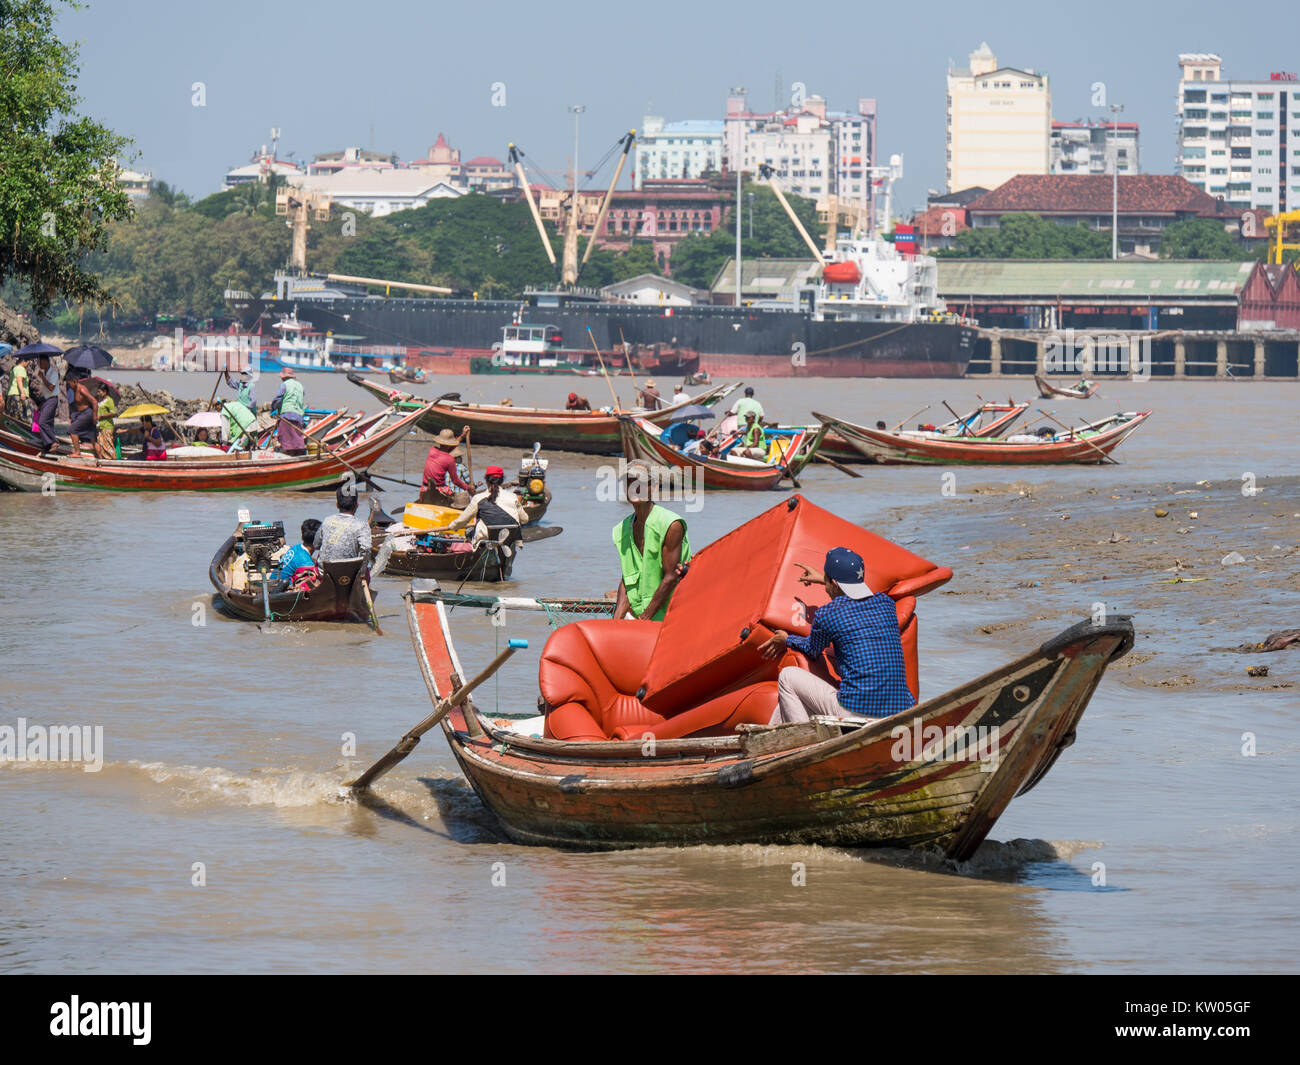 Local ferries and cargo vessels on Dala River where it enters Yangon River. Yangon Township visible on the opposite side of Yangon River. Stock Photo